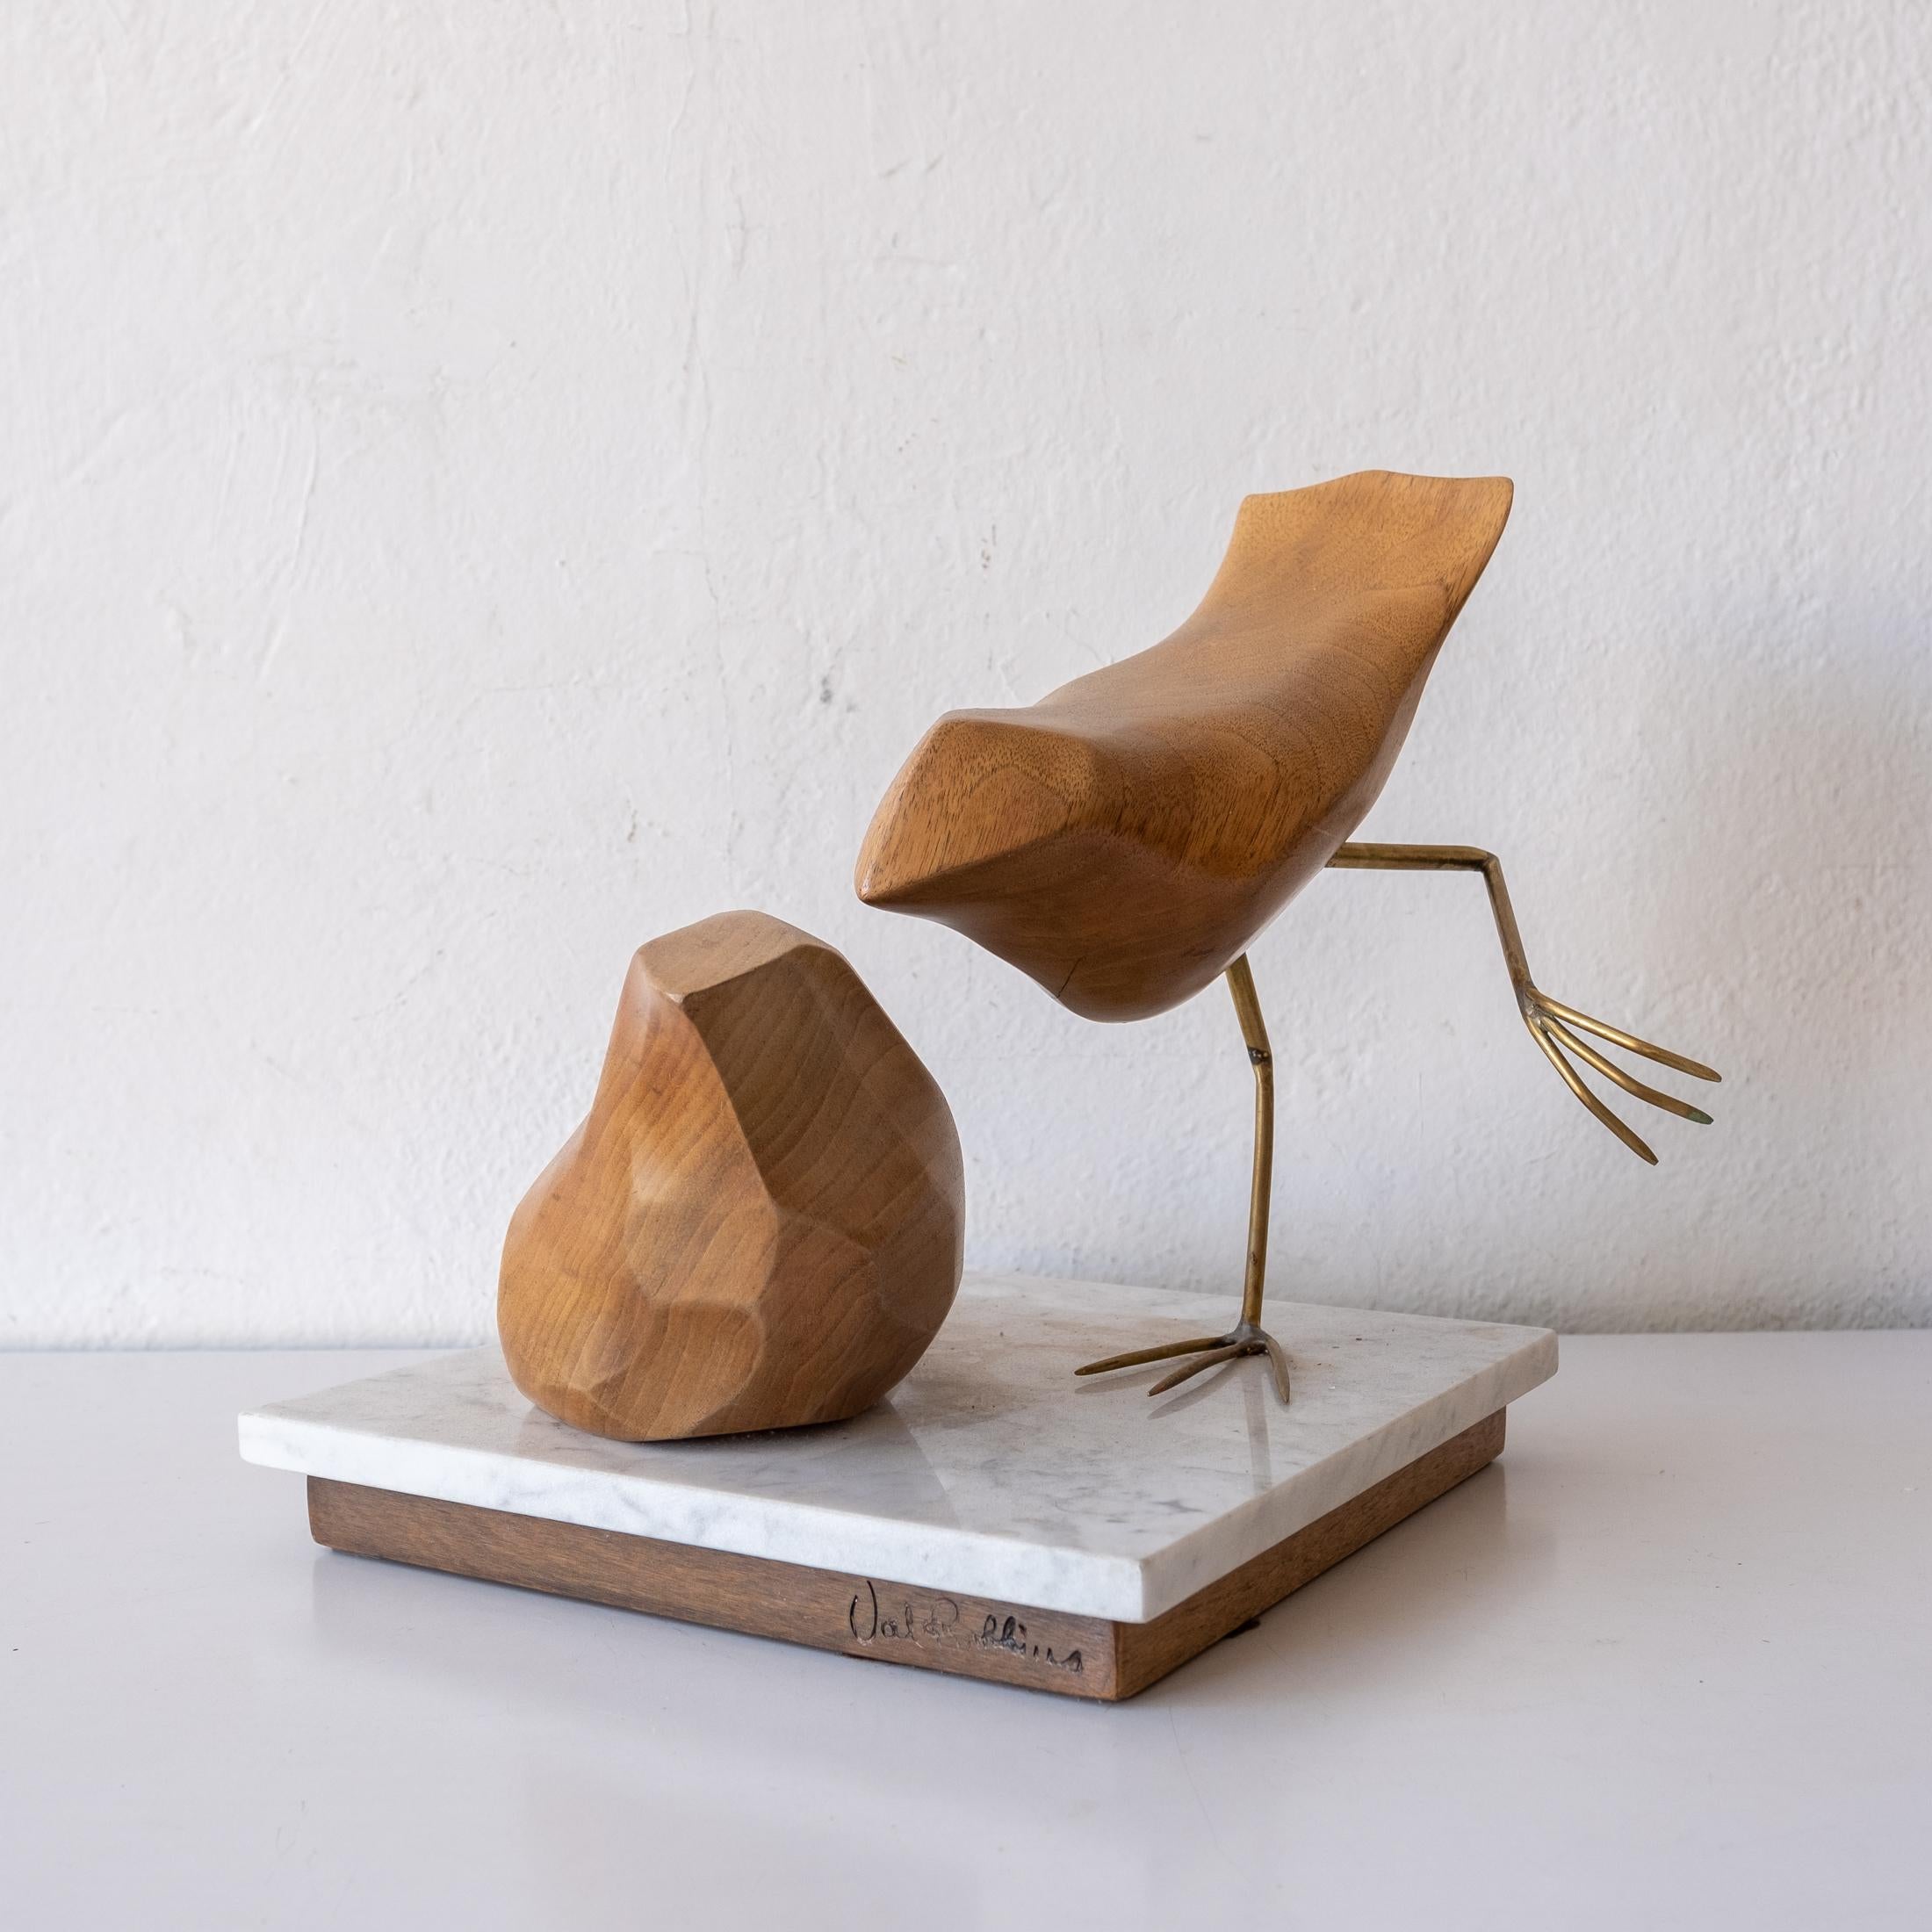 Abstract Wood Bird Sculpture by Val Robbins 1